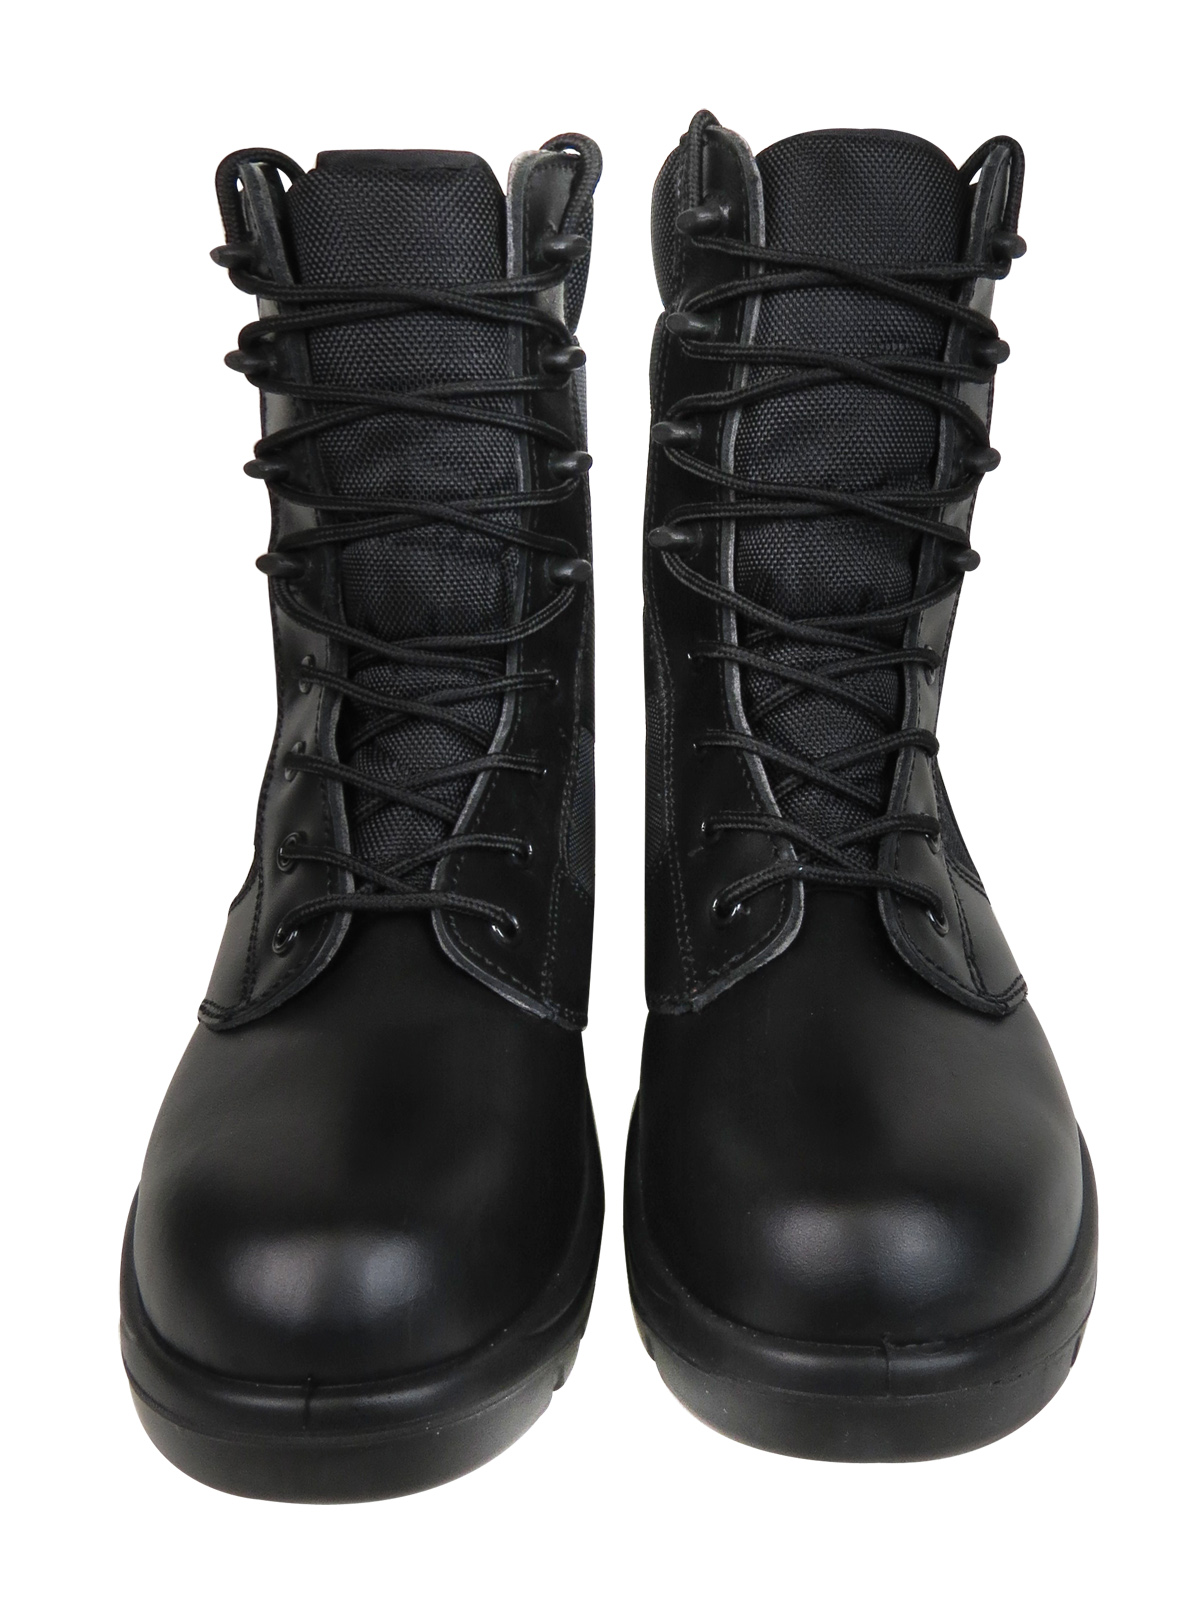 Waterproof Combat Boot by Grafters